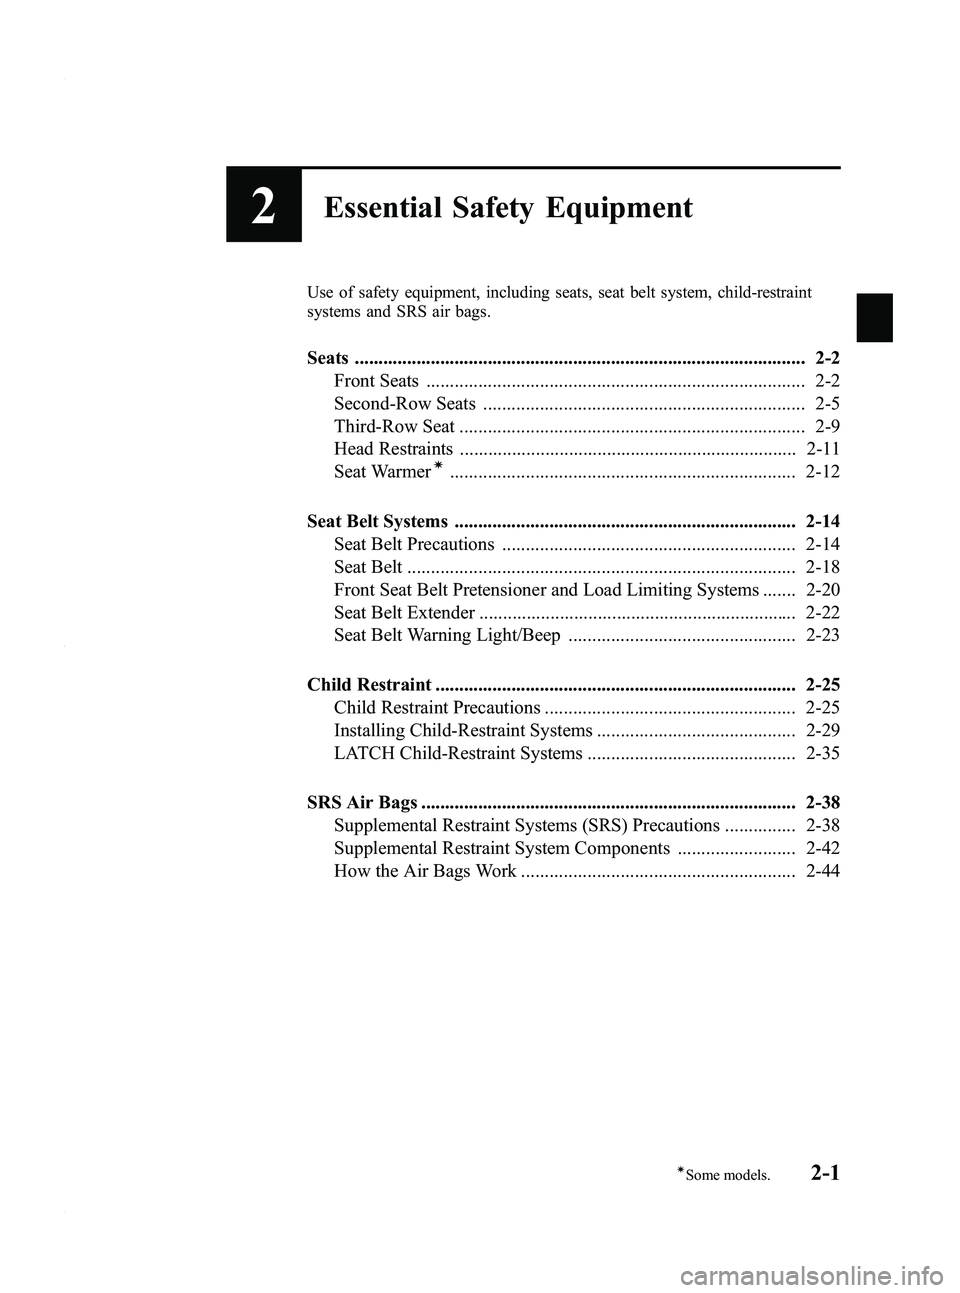 MAZDA MODEL 5 2010 User Guide Black plate (13,1)
2Essential Safety Equipment
Use of safety equipment, including seats, seat belt system, child-restraint
systems and SRS air bags.
Seats .............................................